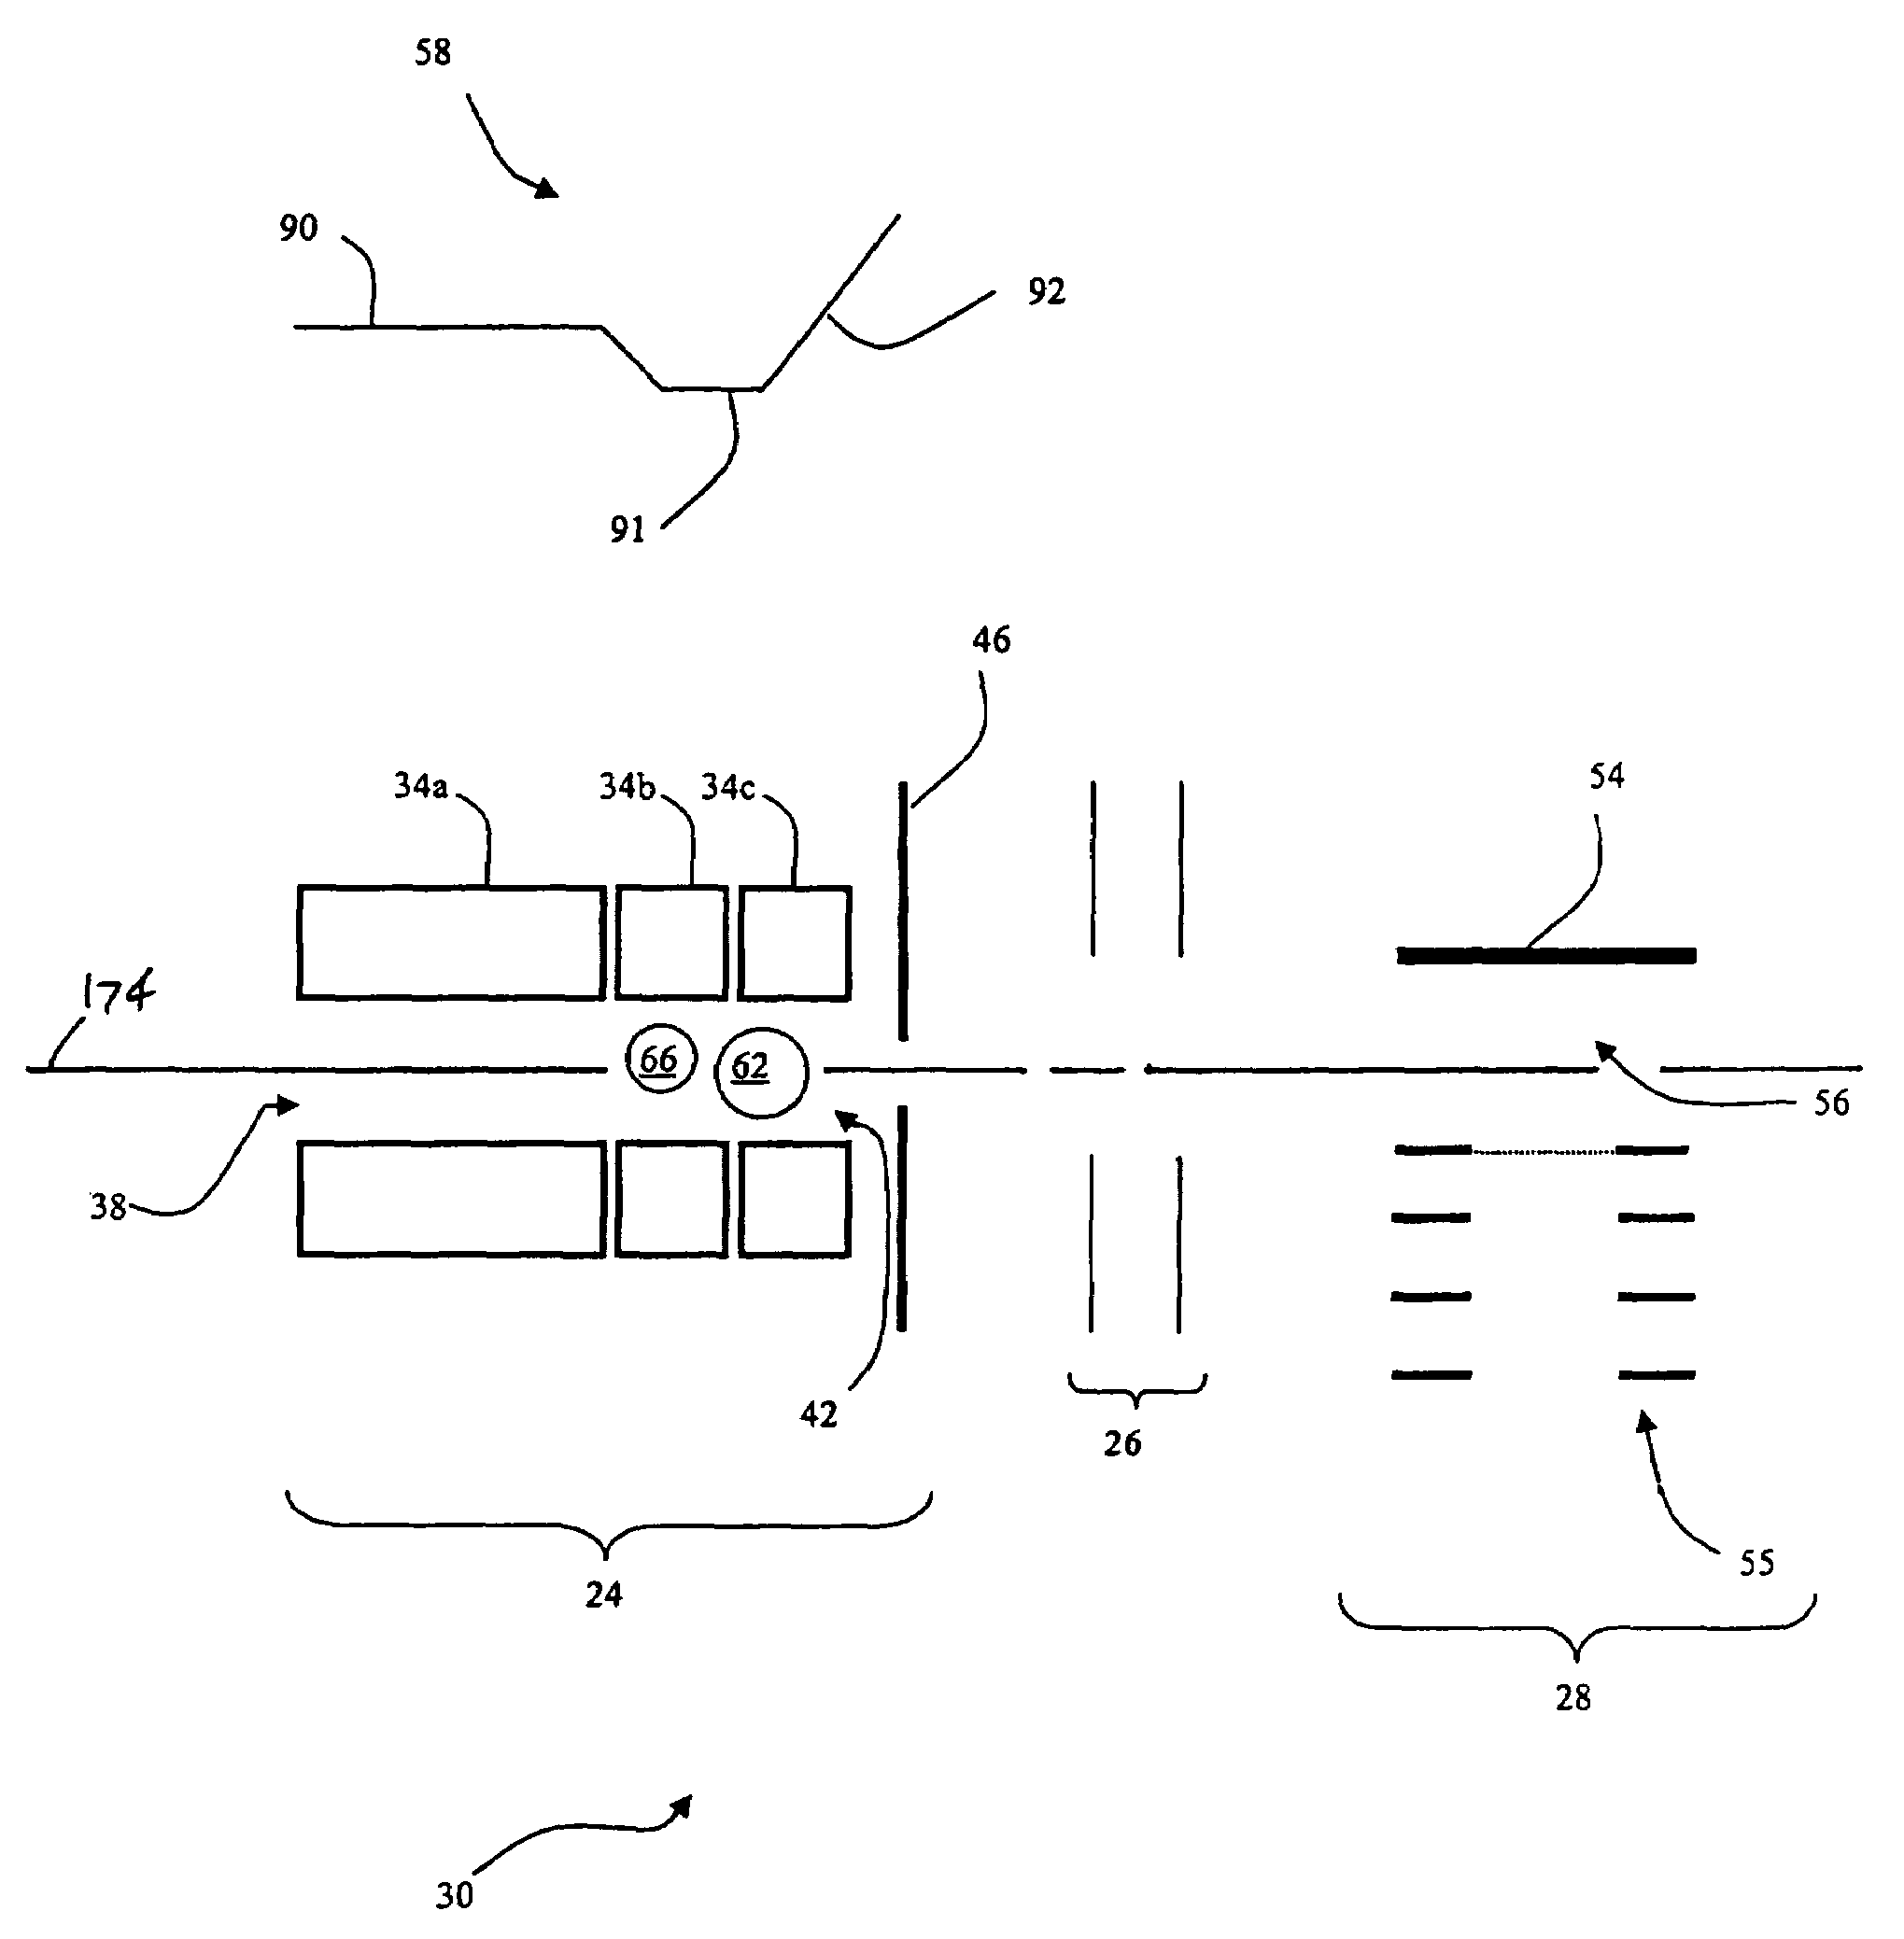 Ion guide for mass spectrometer